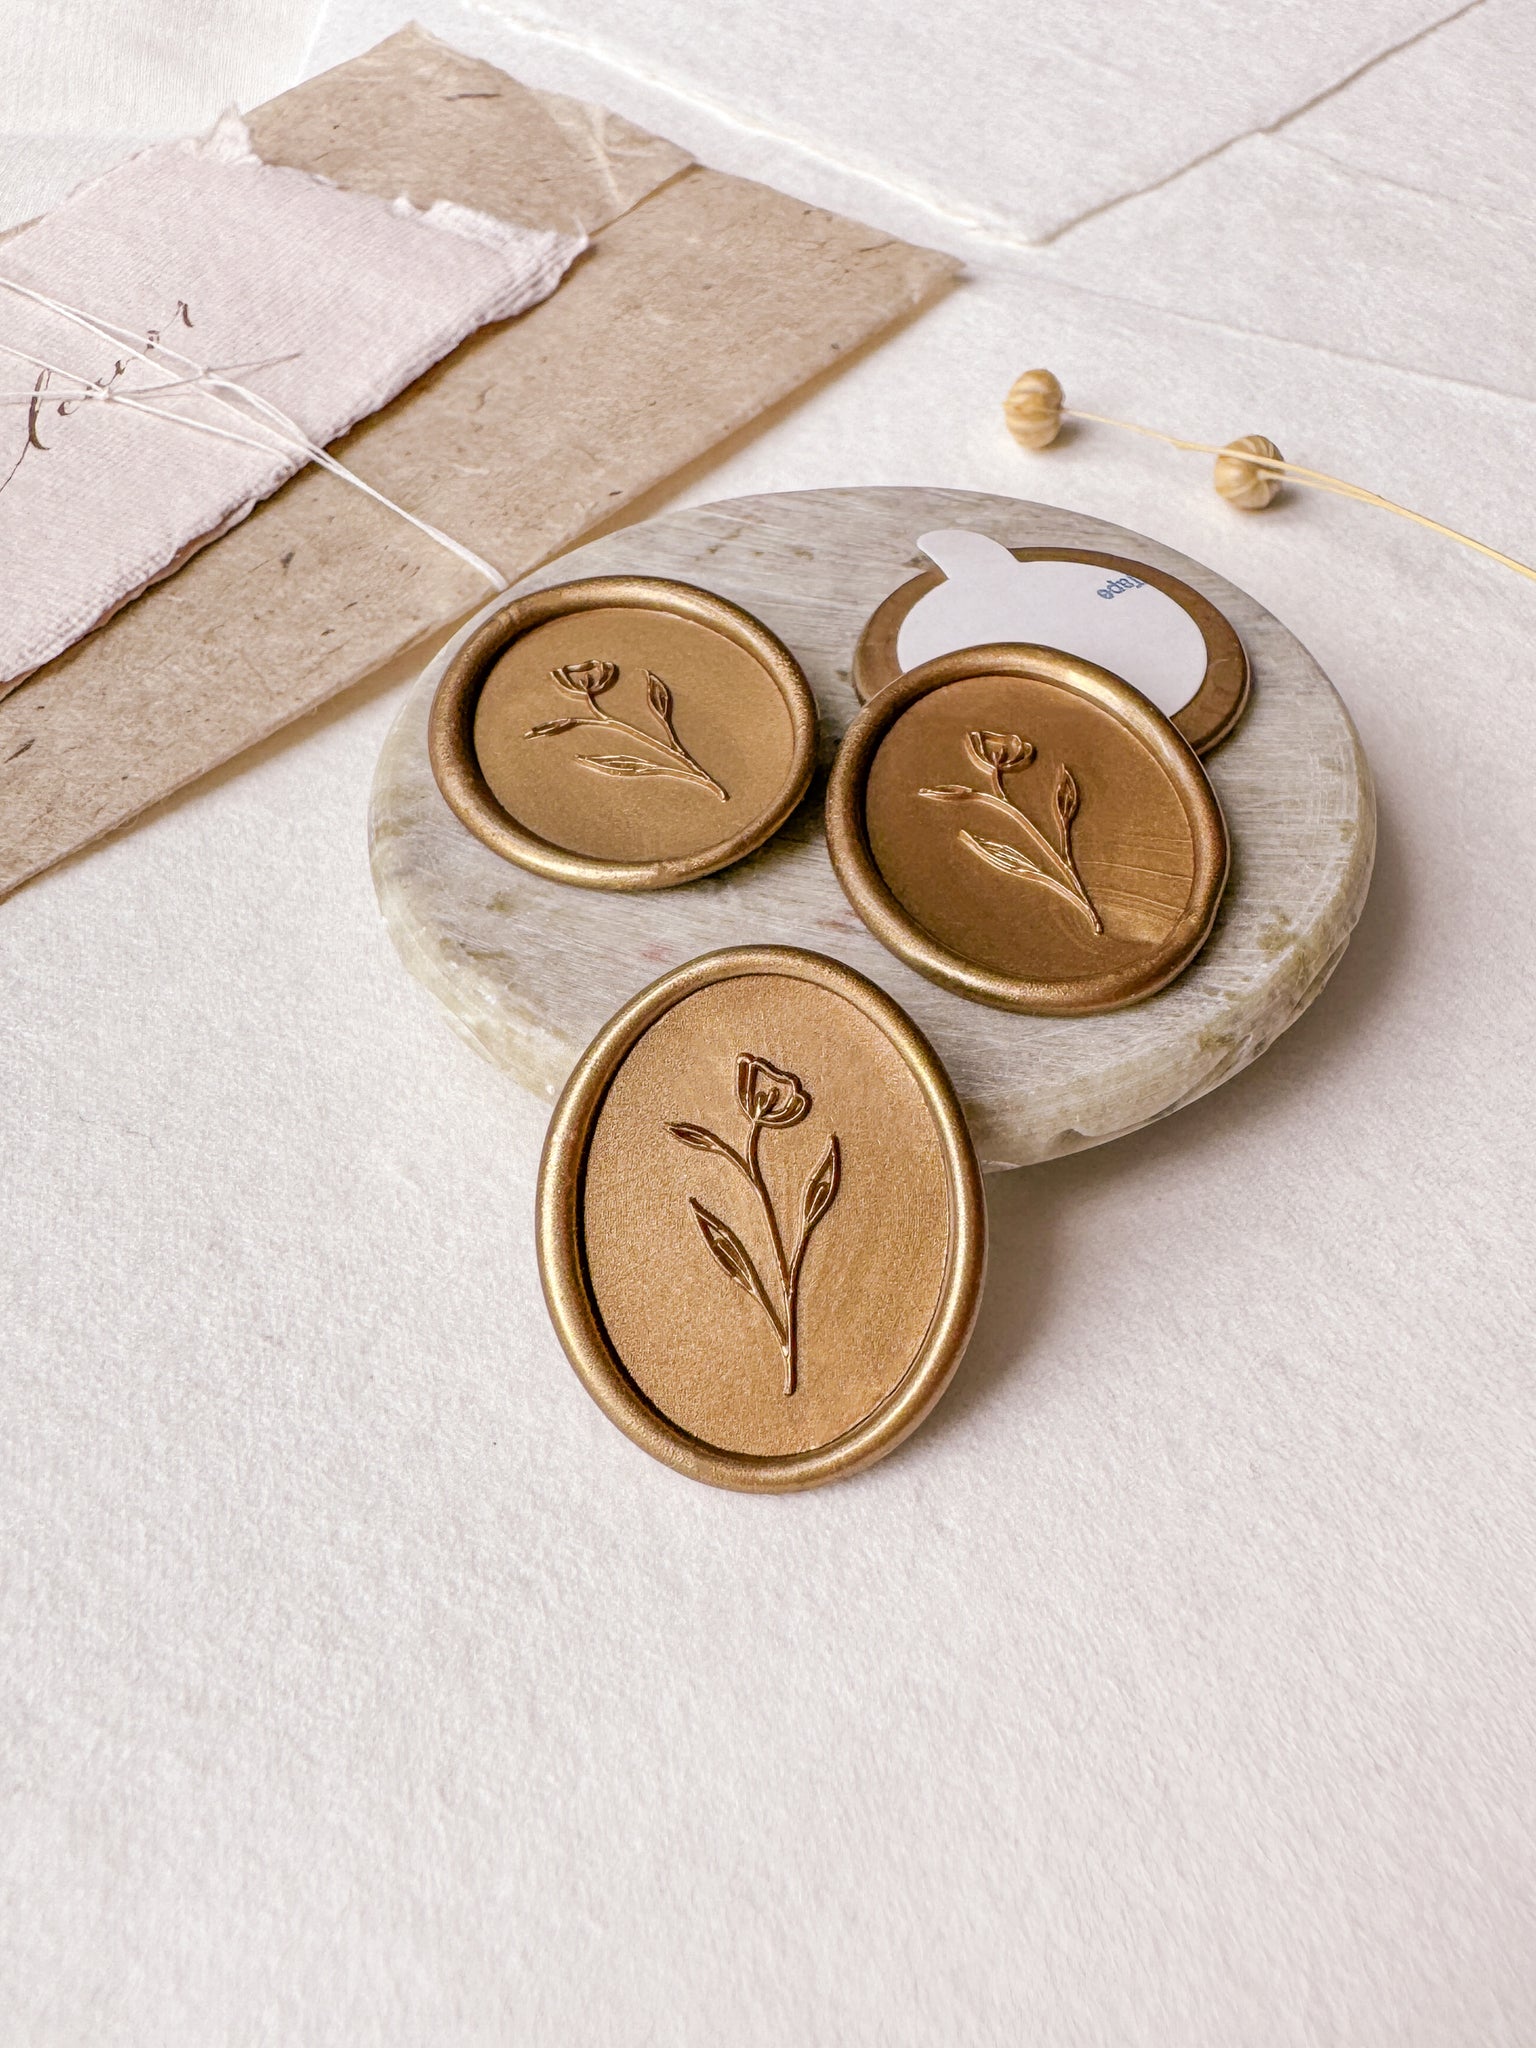 Simple flower oval wax seals in gold styled with a small gray stone dish, handmade paper and a dried floral branch